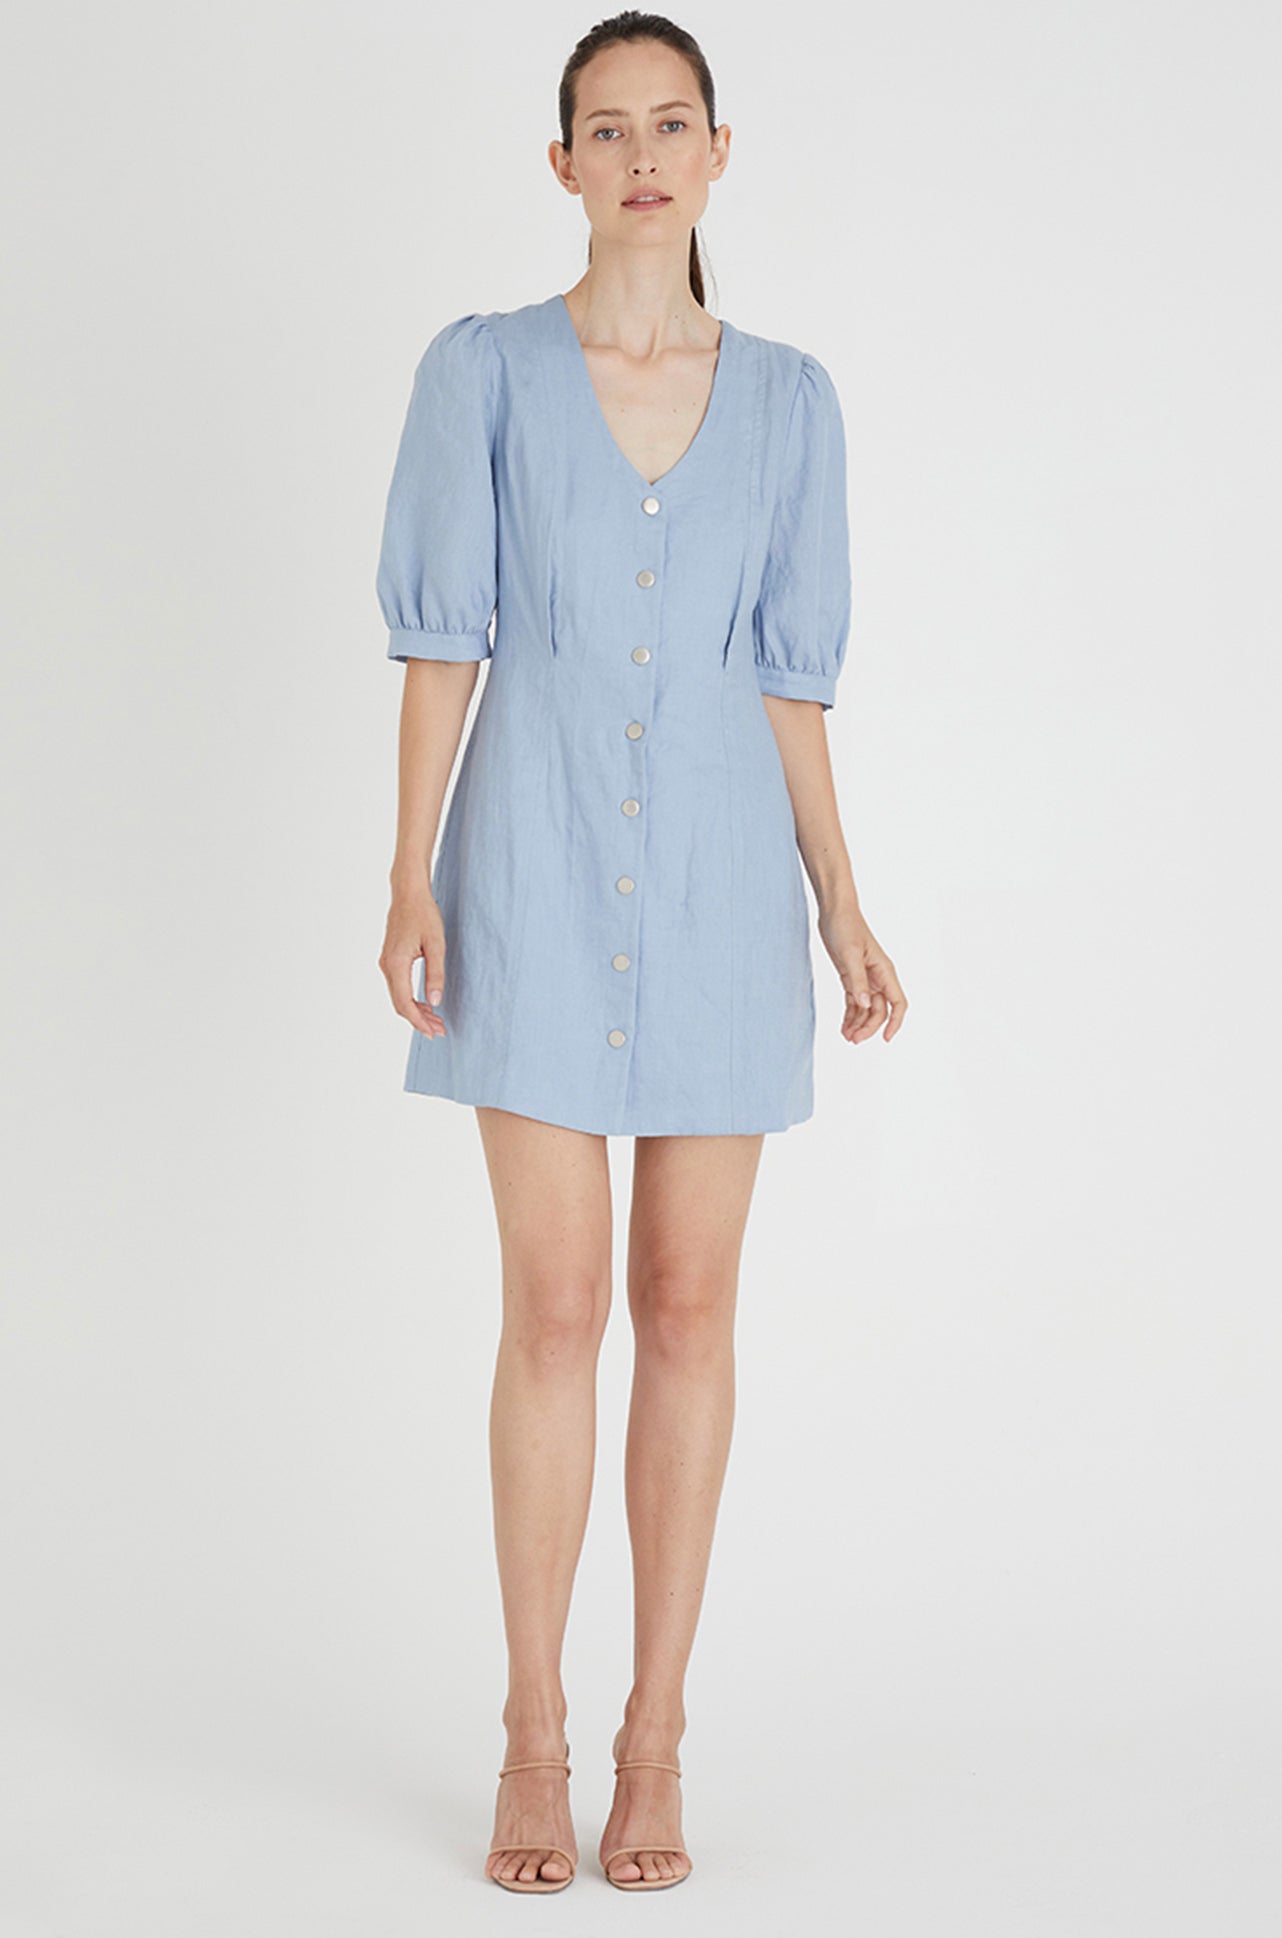 We Are Kindred - Lucia Puff Sleeve Button Through Mini Dress